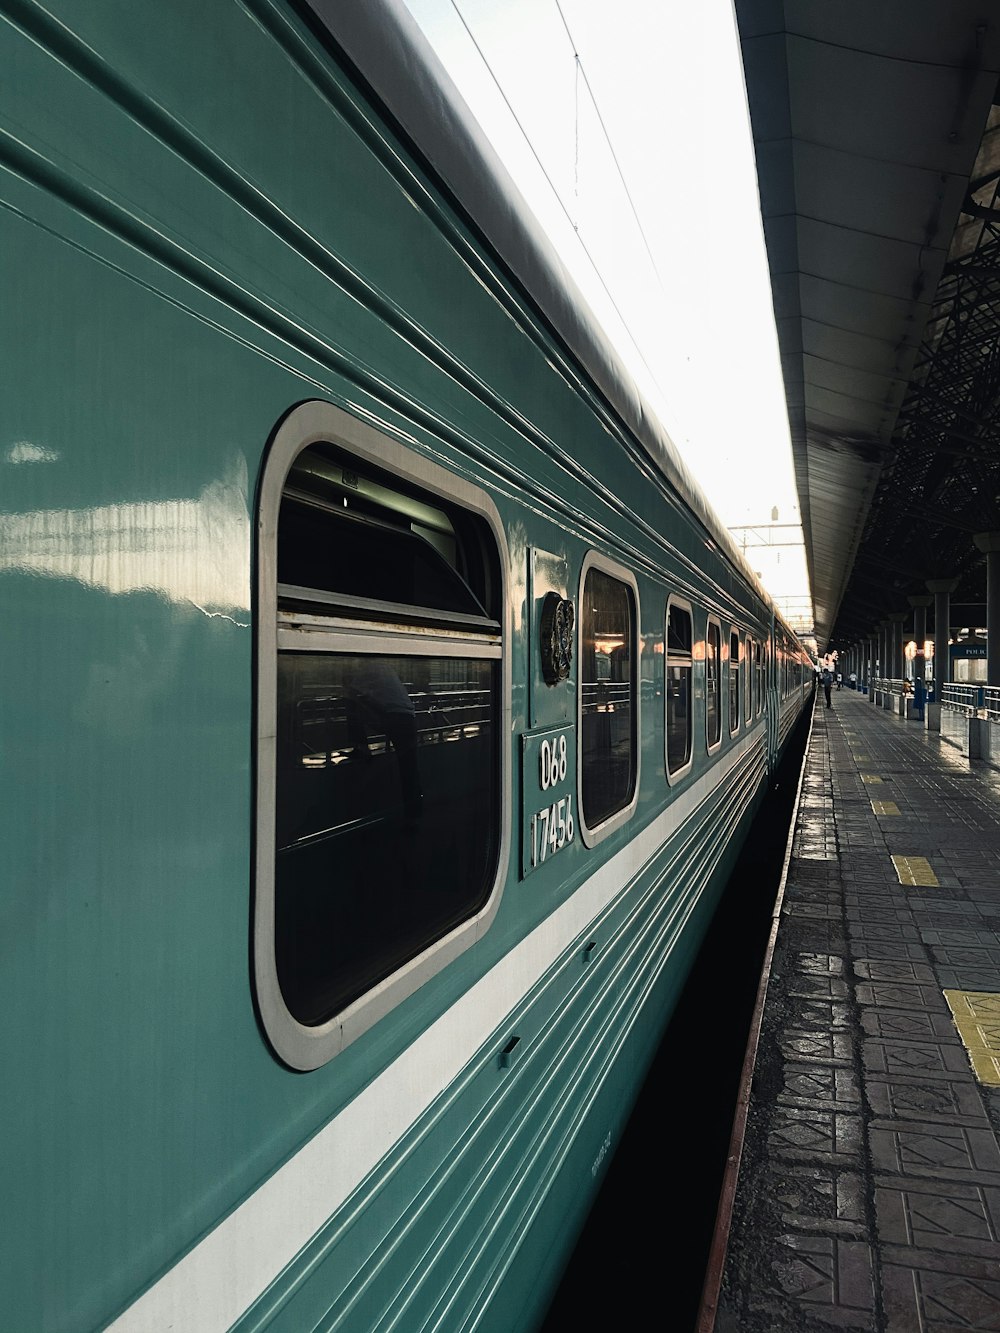 green and white train in train station